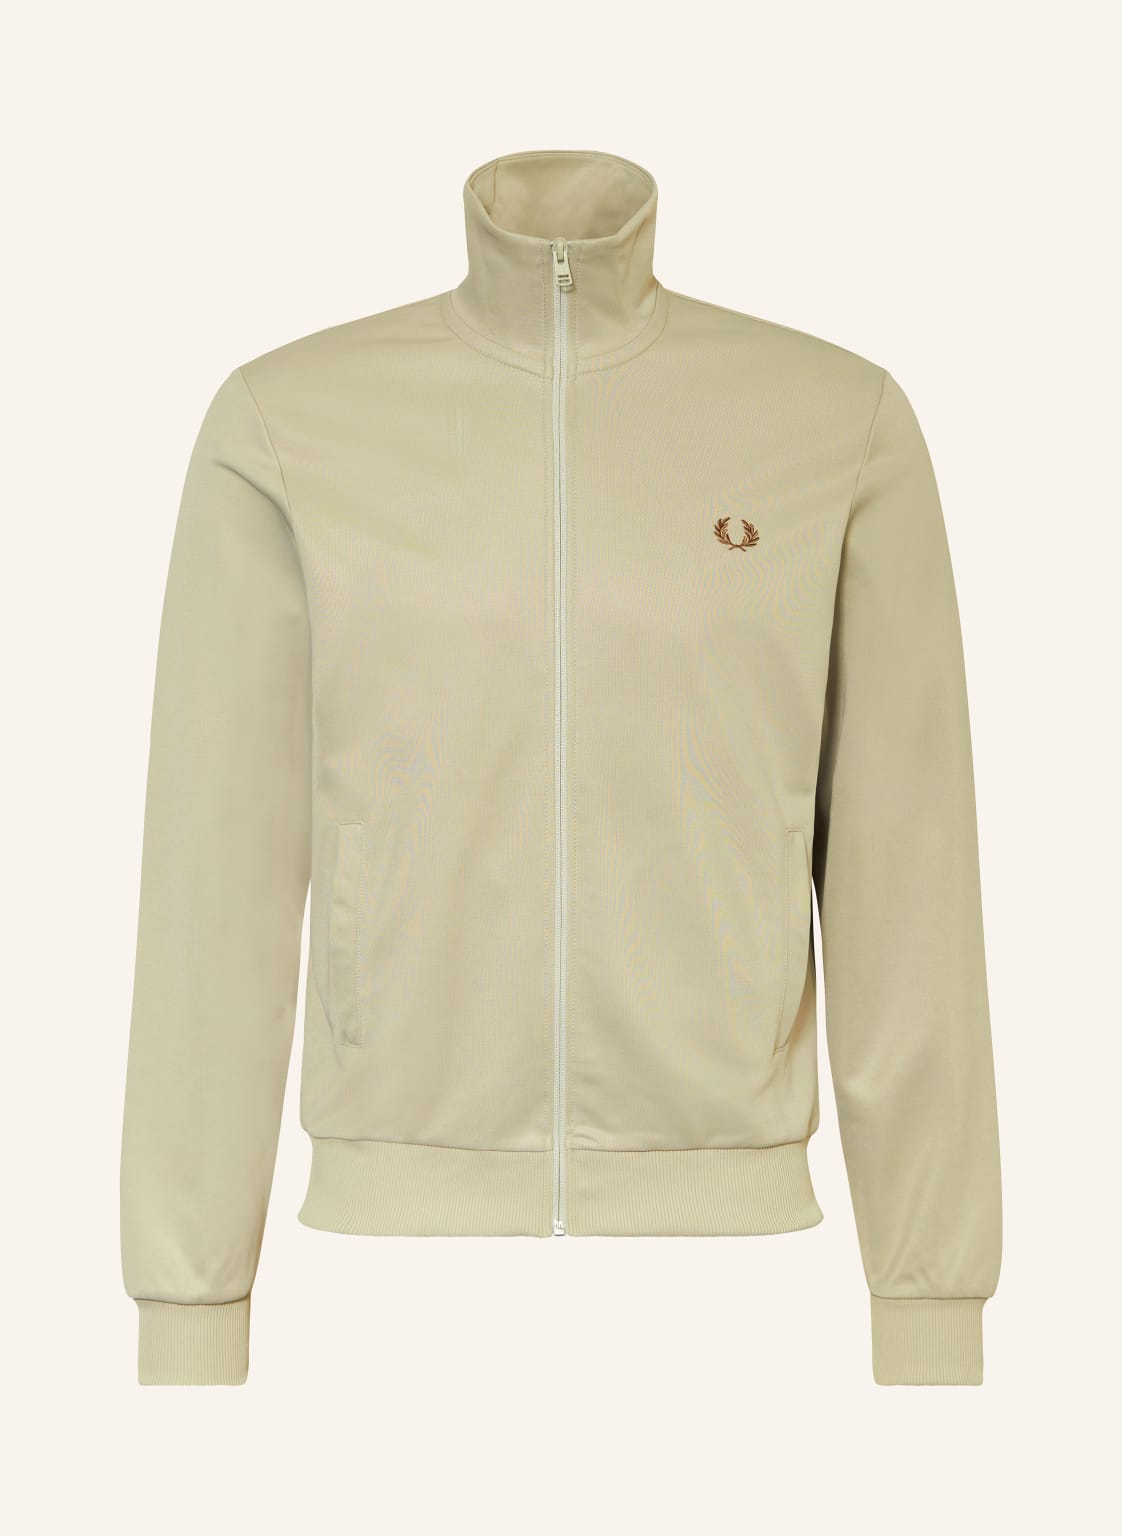 Fred Perry Jacke beige von Fred Perry